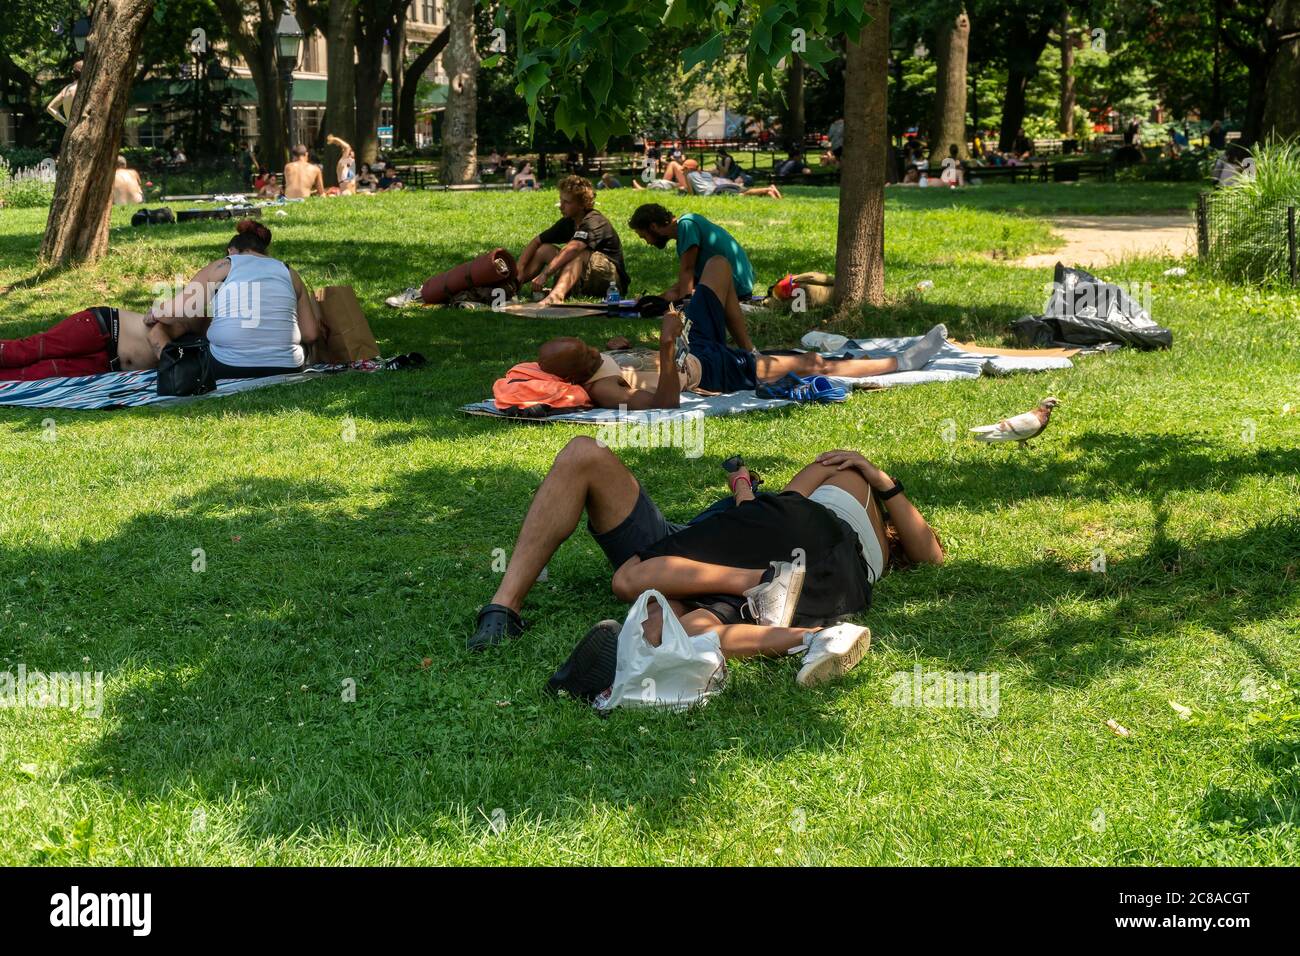 New Yorkers and visitors on the lawn in Washington Square Park in Greenwich Village in New York on Sunday, July 19, 2020. The city is suffering through min-90s temperatures with Monday’s expected “real-feel” temperature passing 100 degrees. . (© Richard B. Levine) Stock Photo